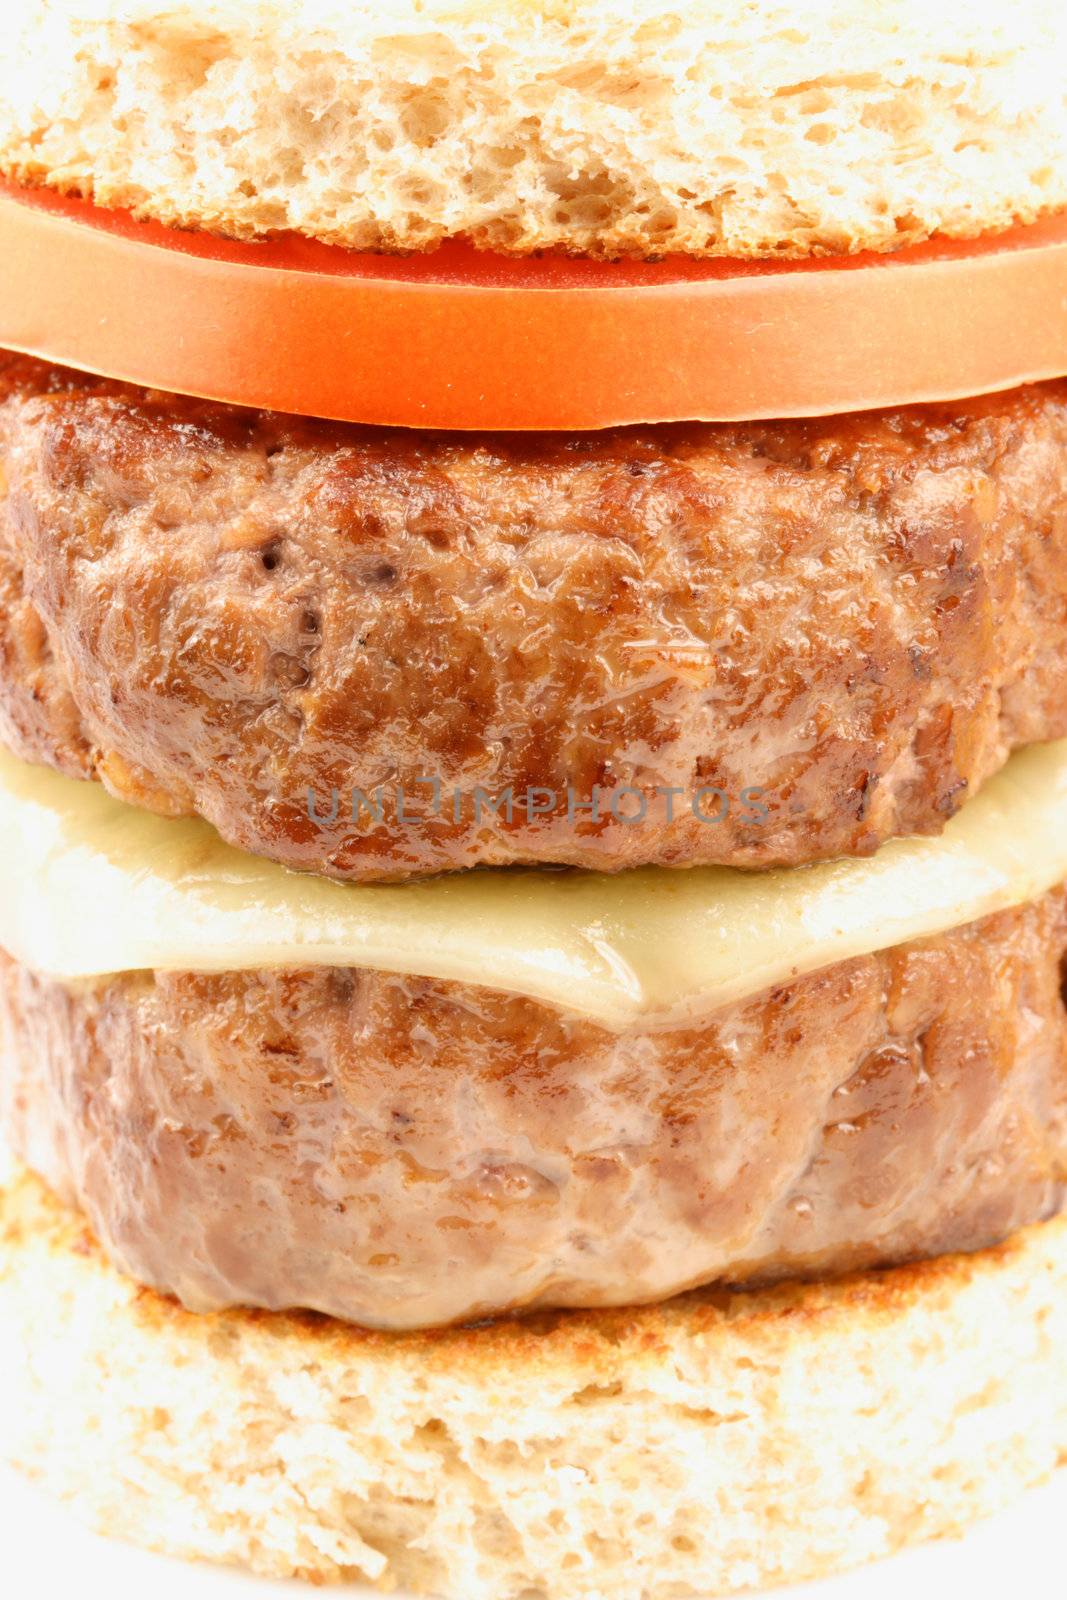 gourmet patty melt, Season the ground beef with salt, pepper, and garlic salt according to taste. Make into patties and cook until done, shalow dof